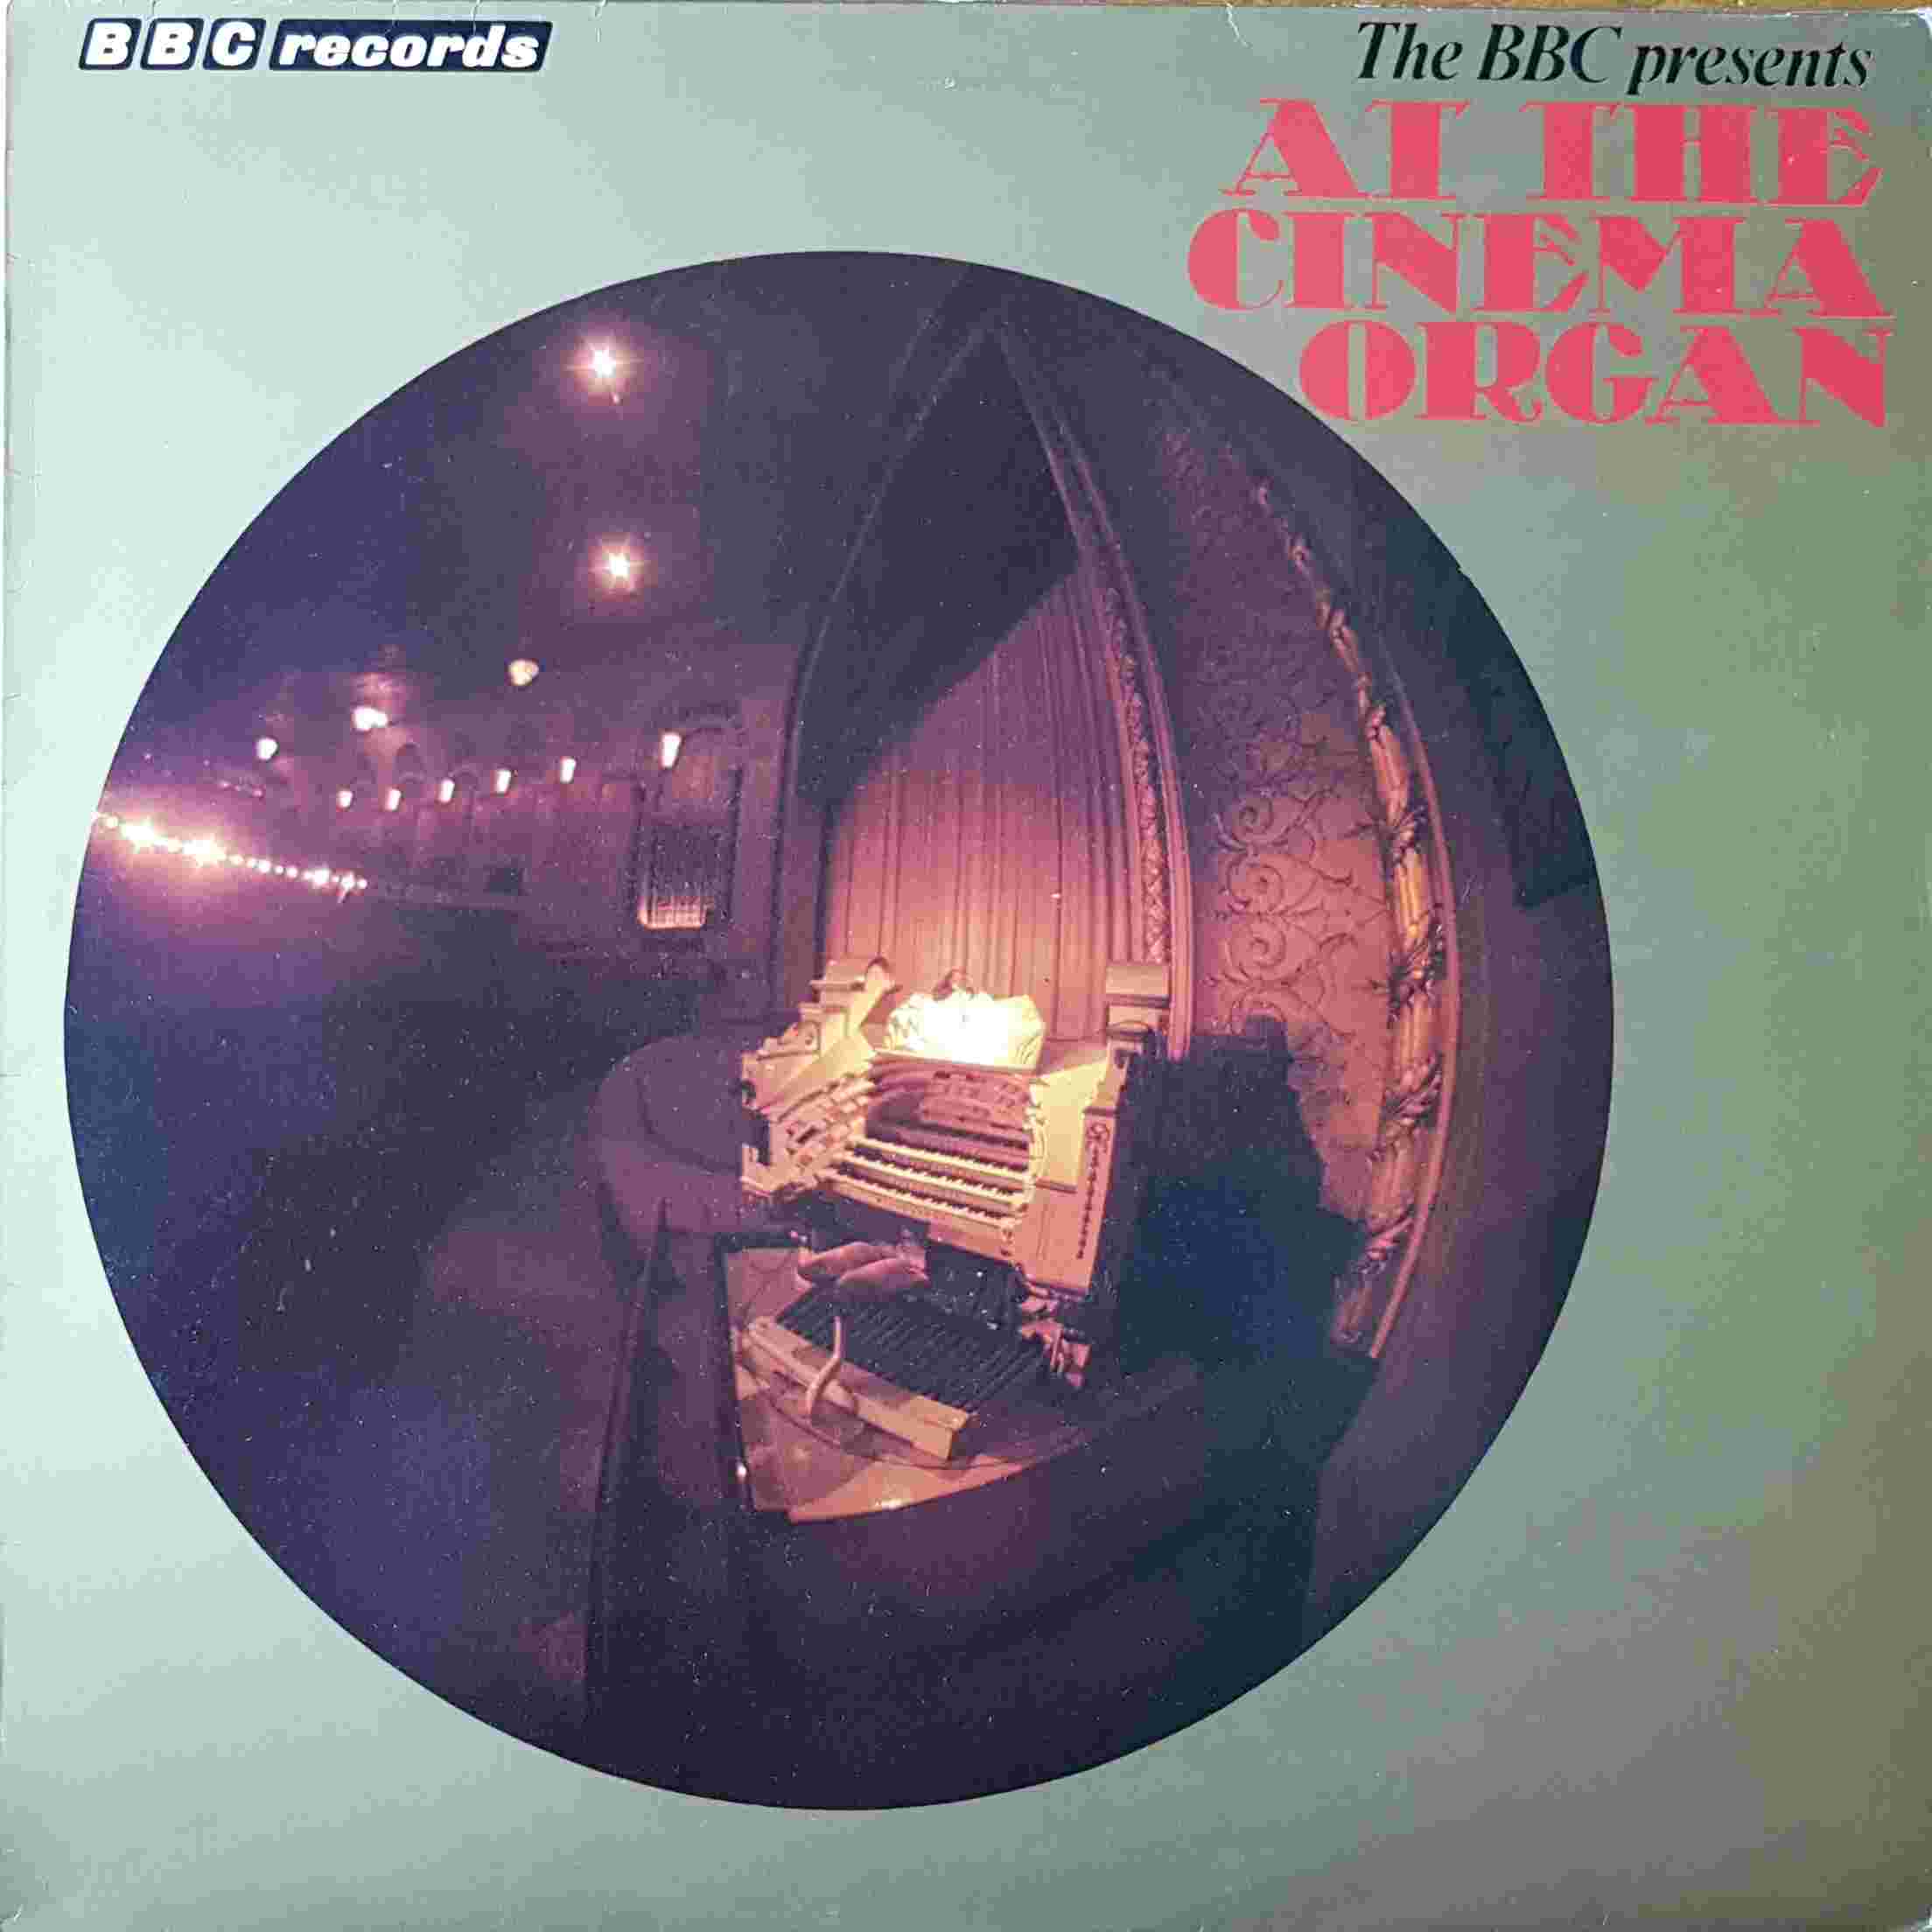 Picture of REC 137 At the cinema organ by artist Various from the BBC albums - Records and Tapes library